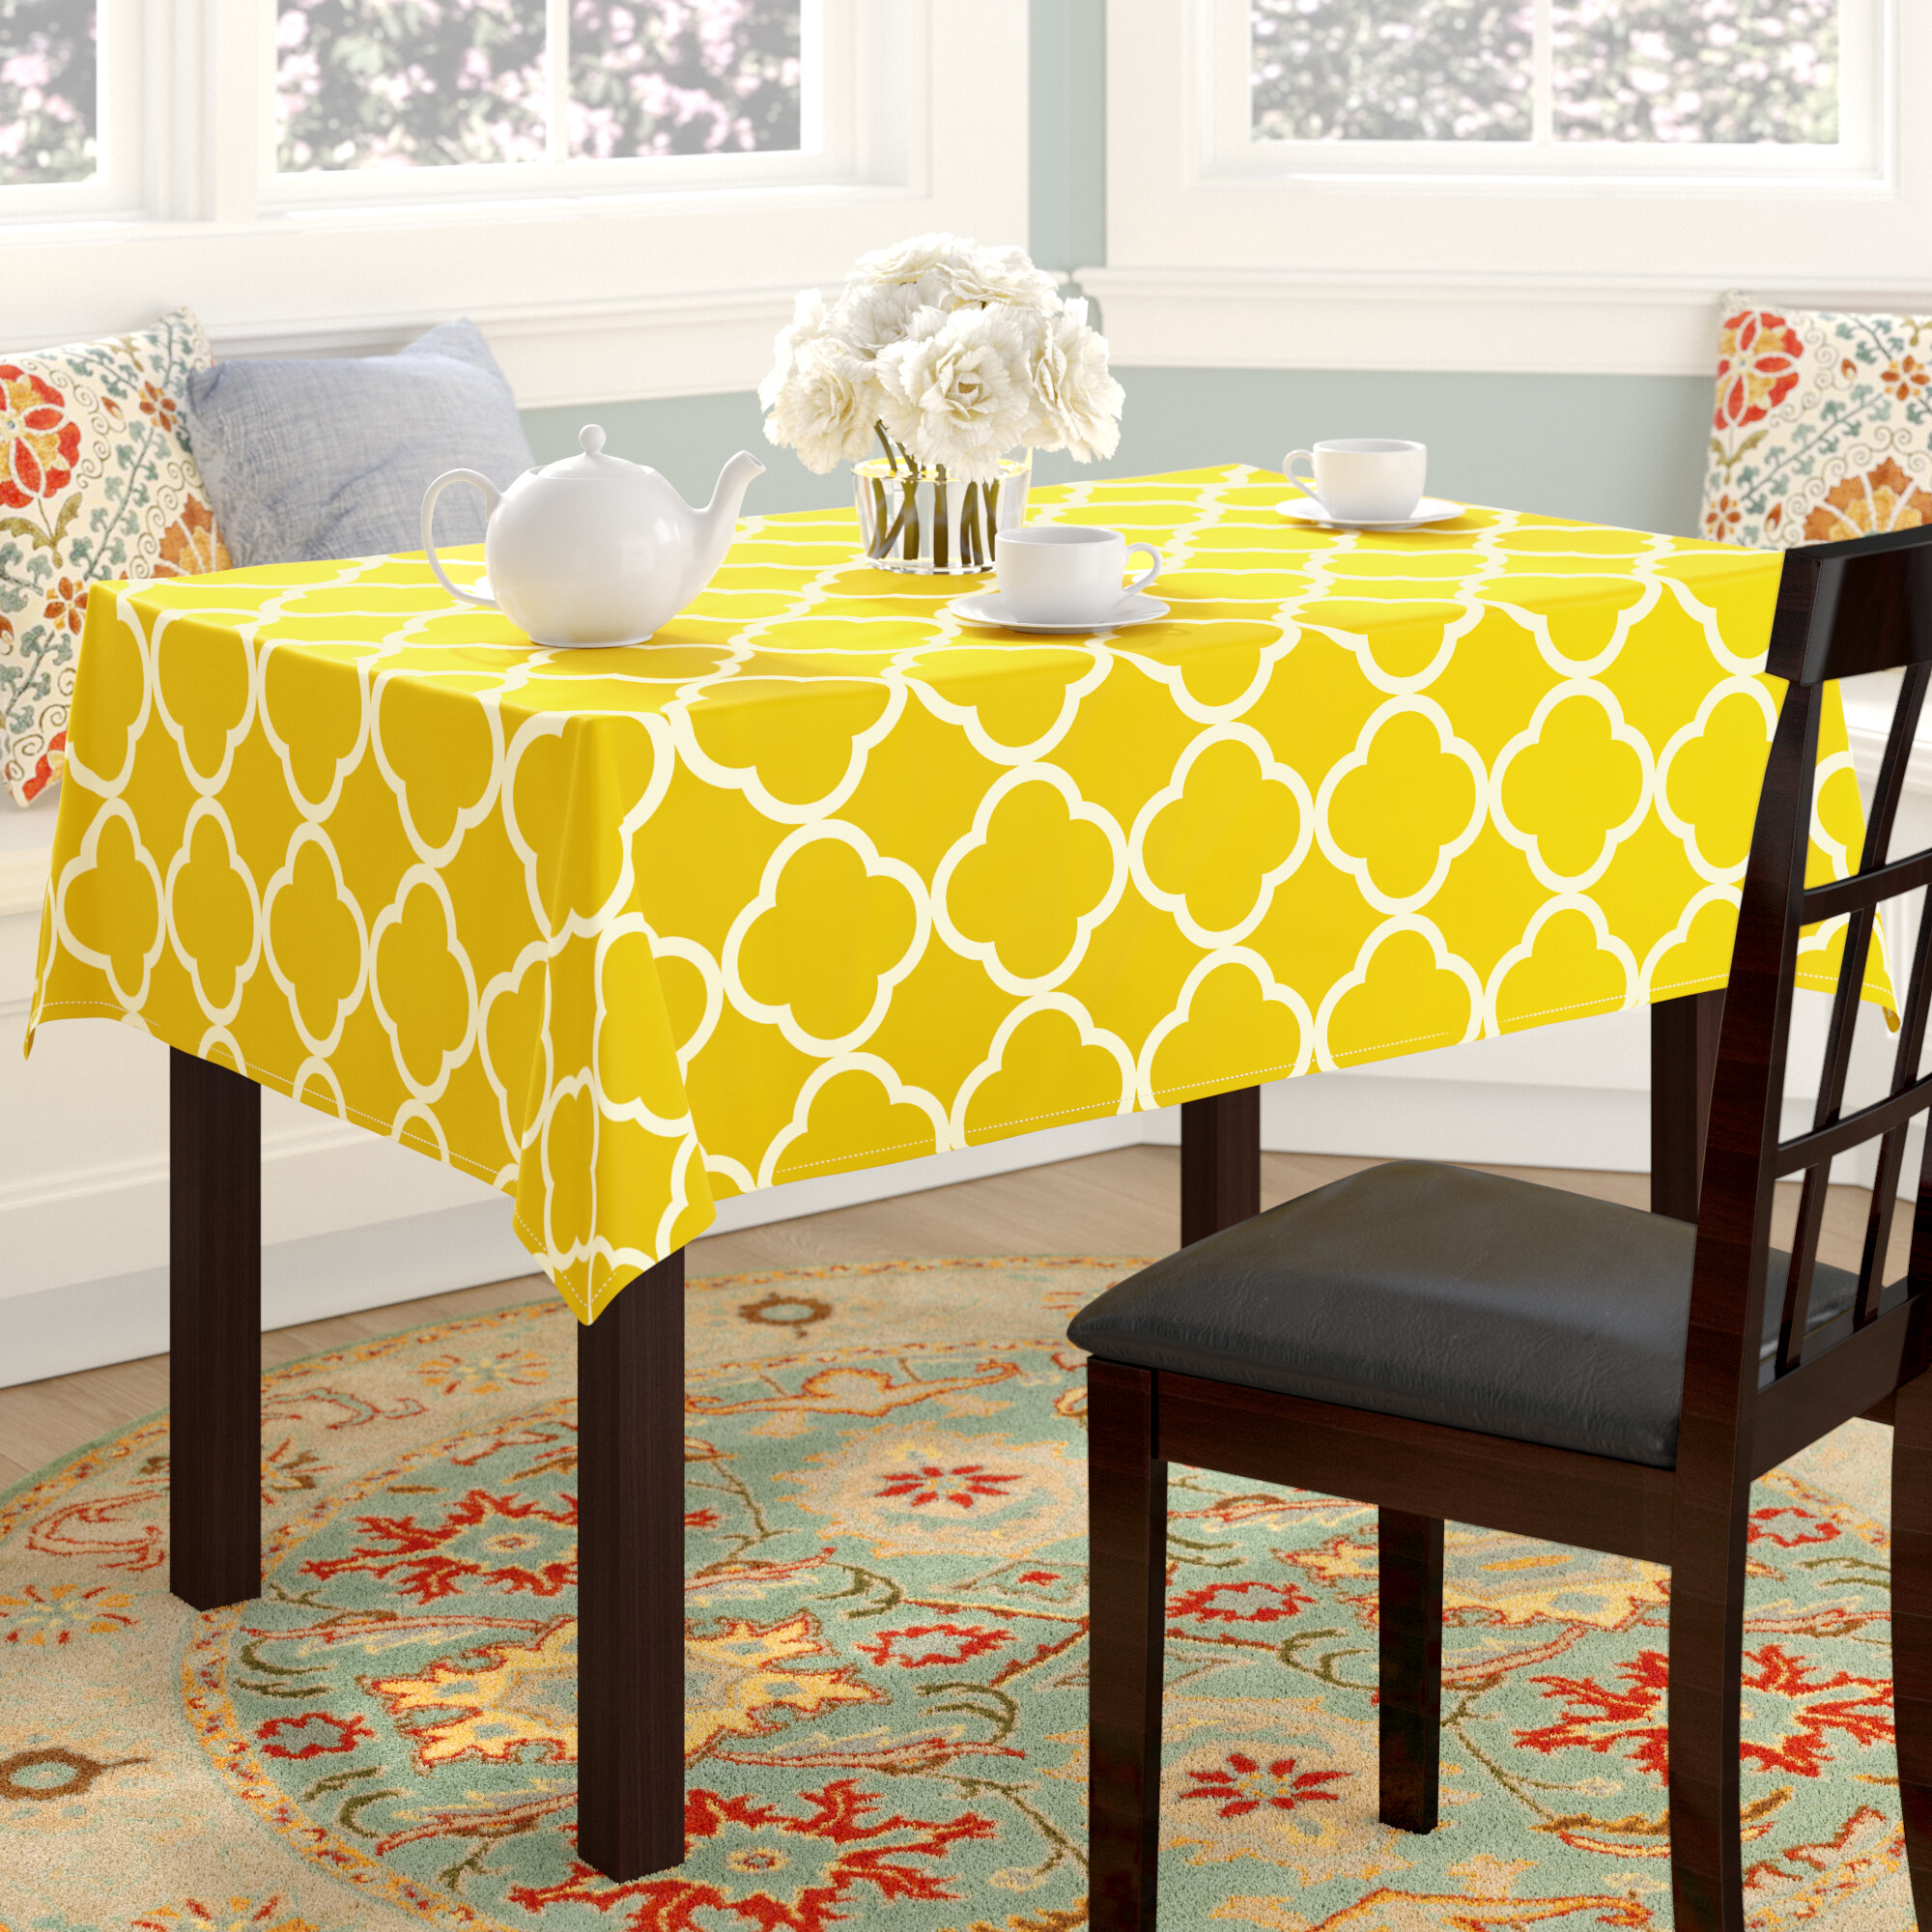 yellow and grey tablecloth